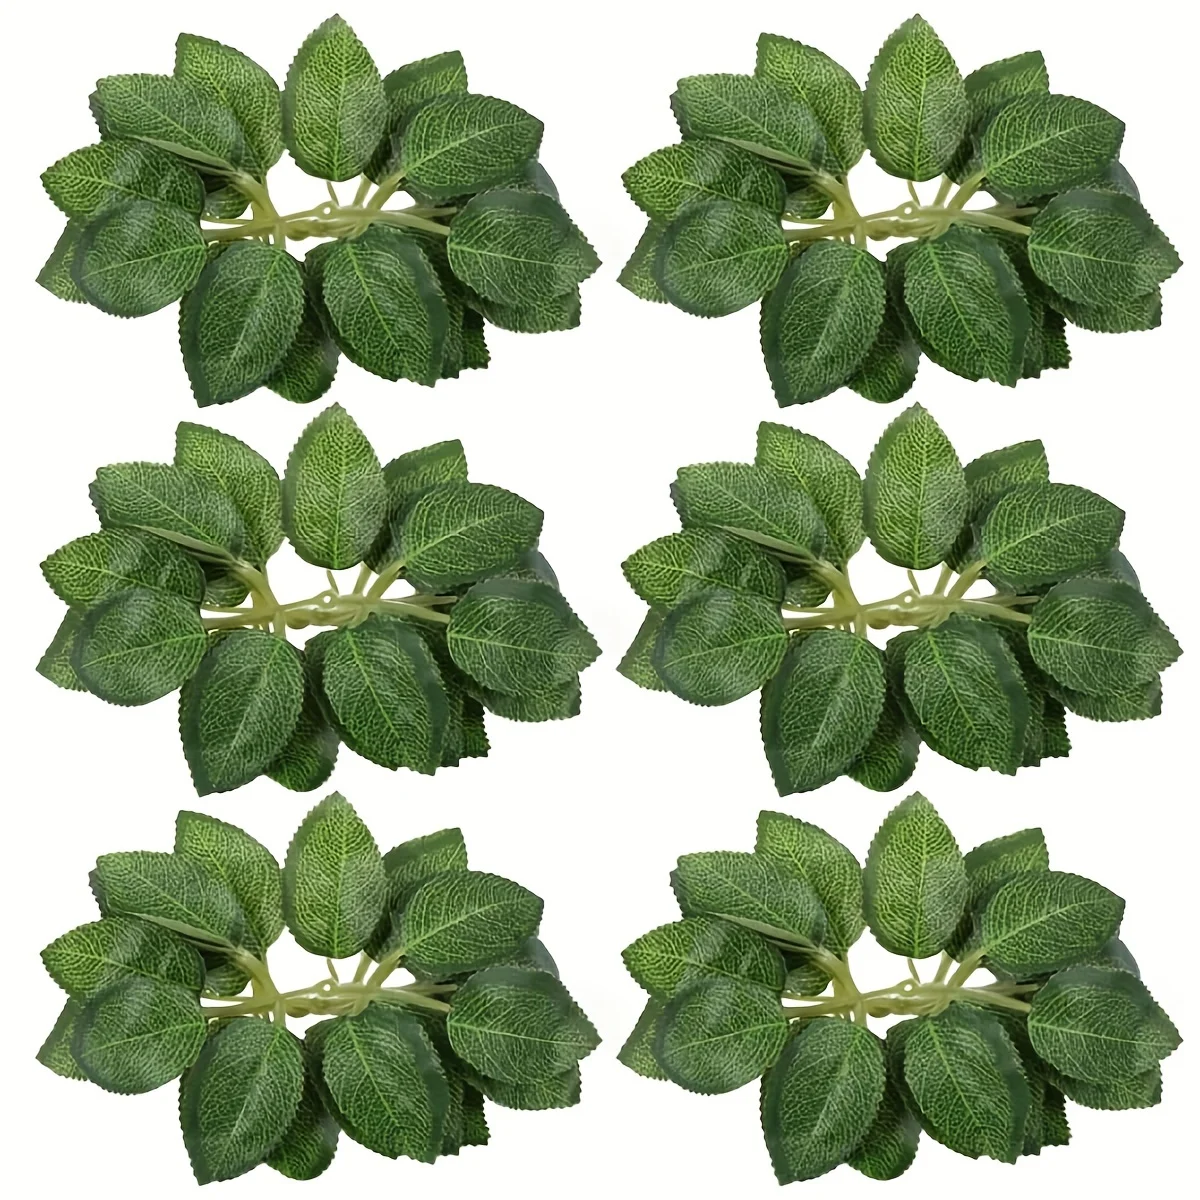 

80/200pcs, Artificial Bulk Fake Leaves For Roses Decorations, Green Rose Leaves With Stems For DIY Wedding Bouquets Centerpieces